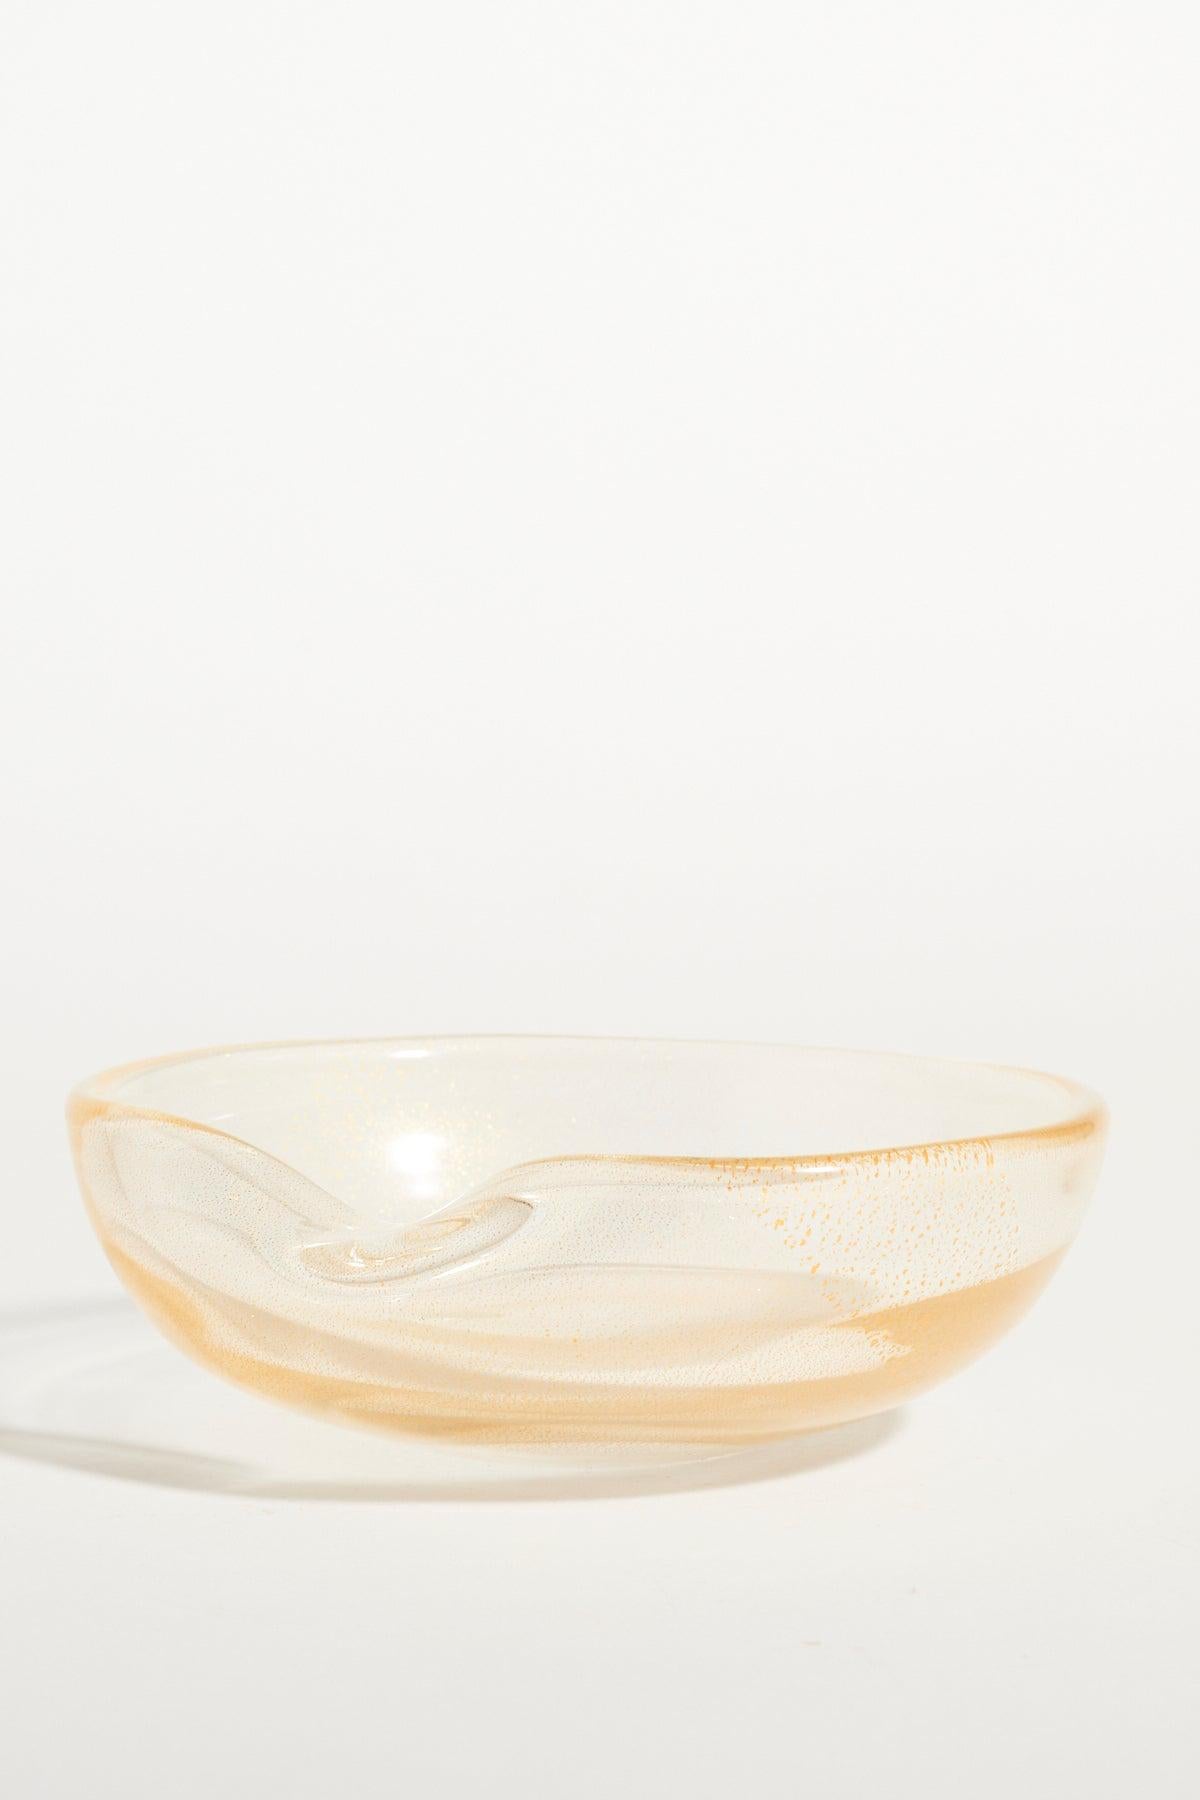 Gold Flecked Elsa Peretti for Tiffany and Co Catchall In Excellent Condition In New York, NY